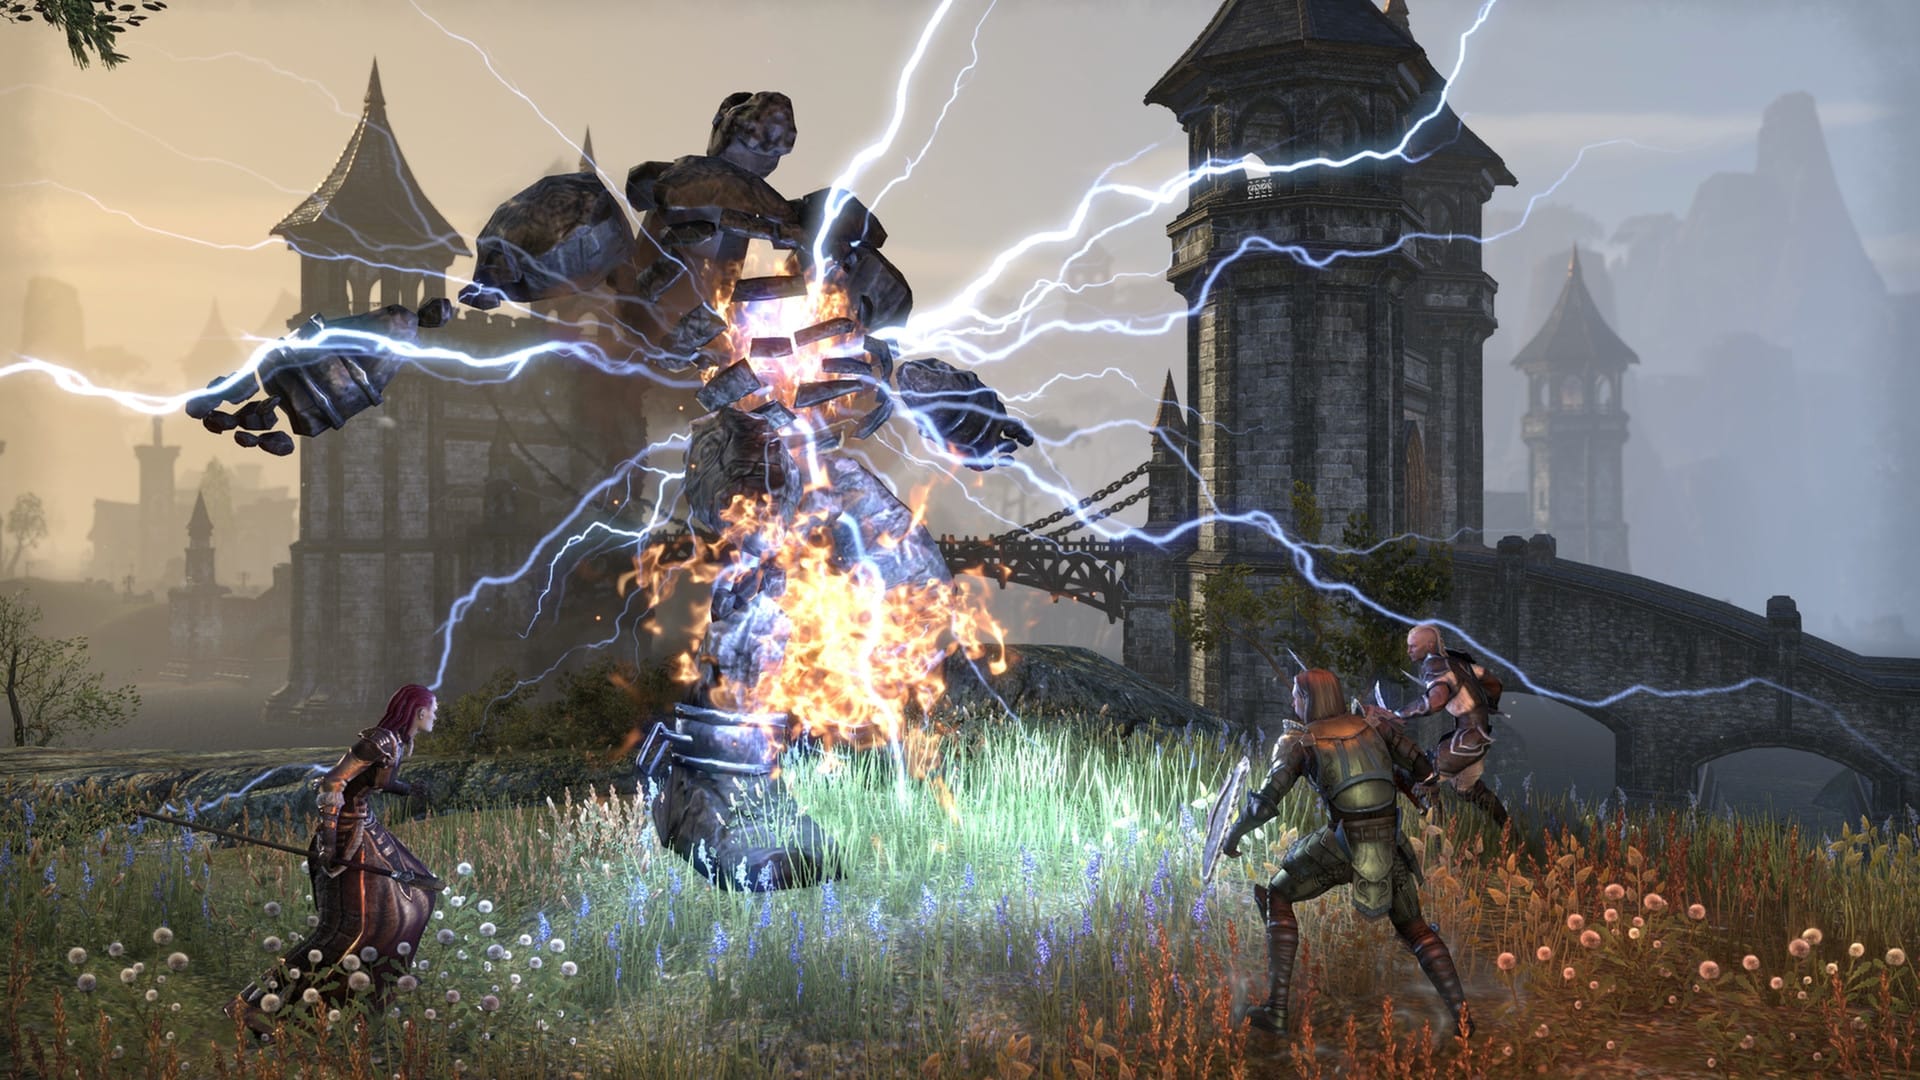 Best MMORPG games: The Elder Scrolls Online. Image shows a party of three characters coming up against a large stone creature with electricity coming out of it.